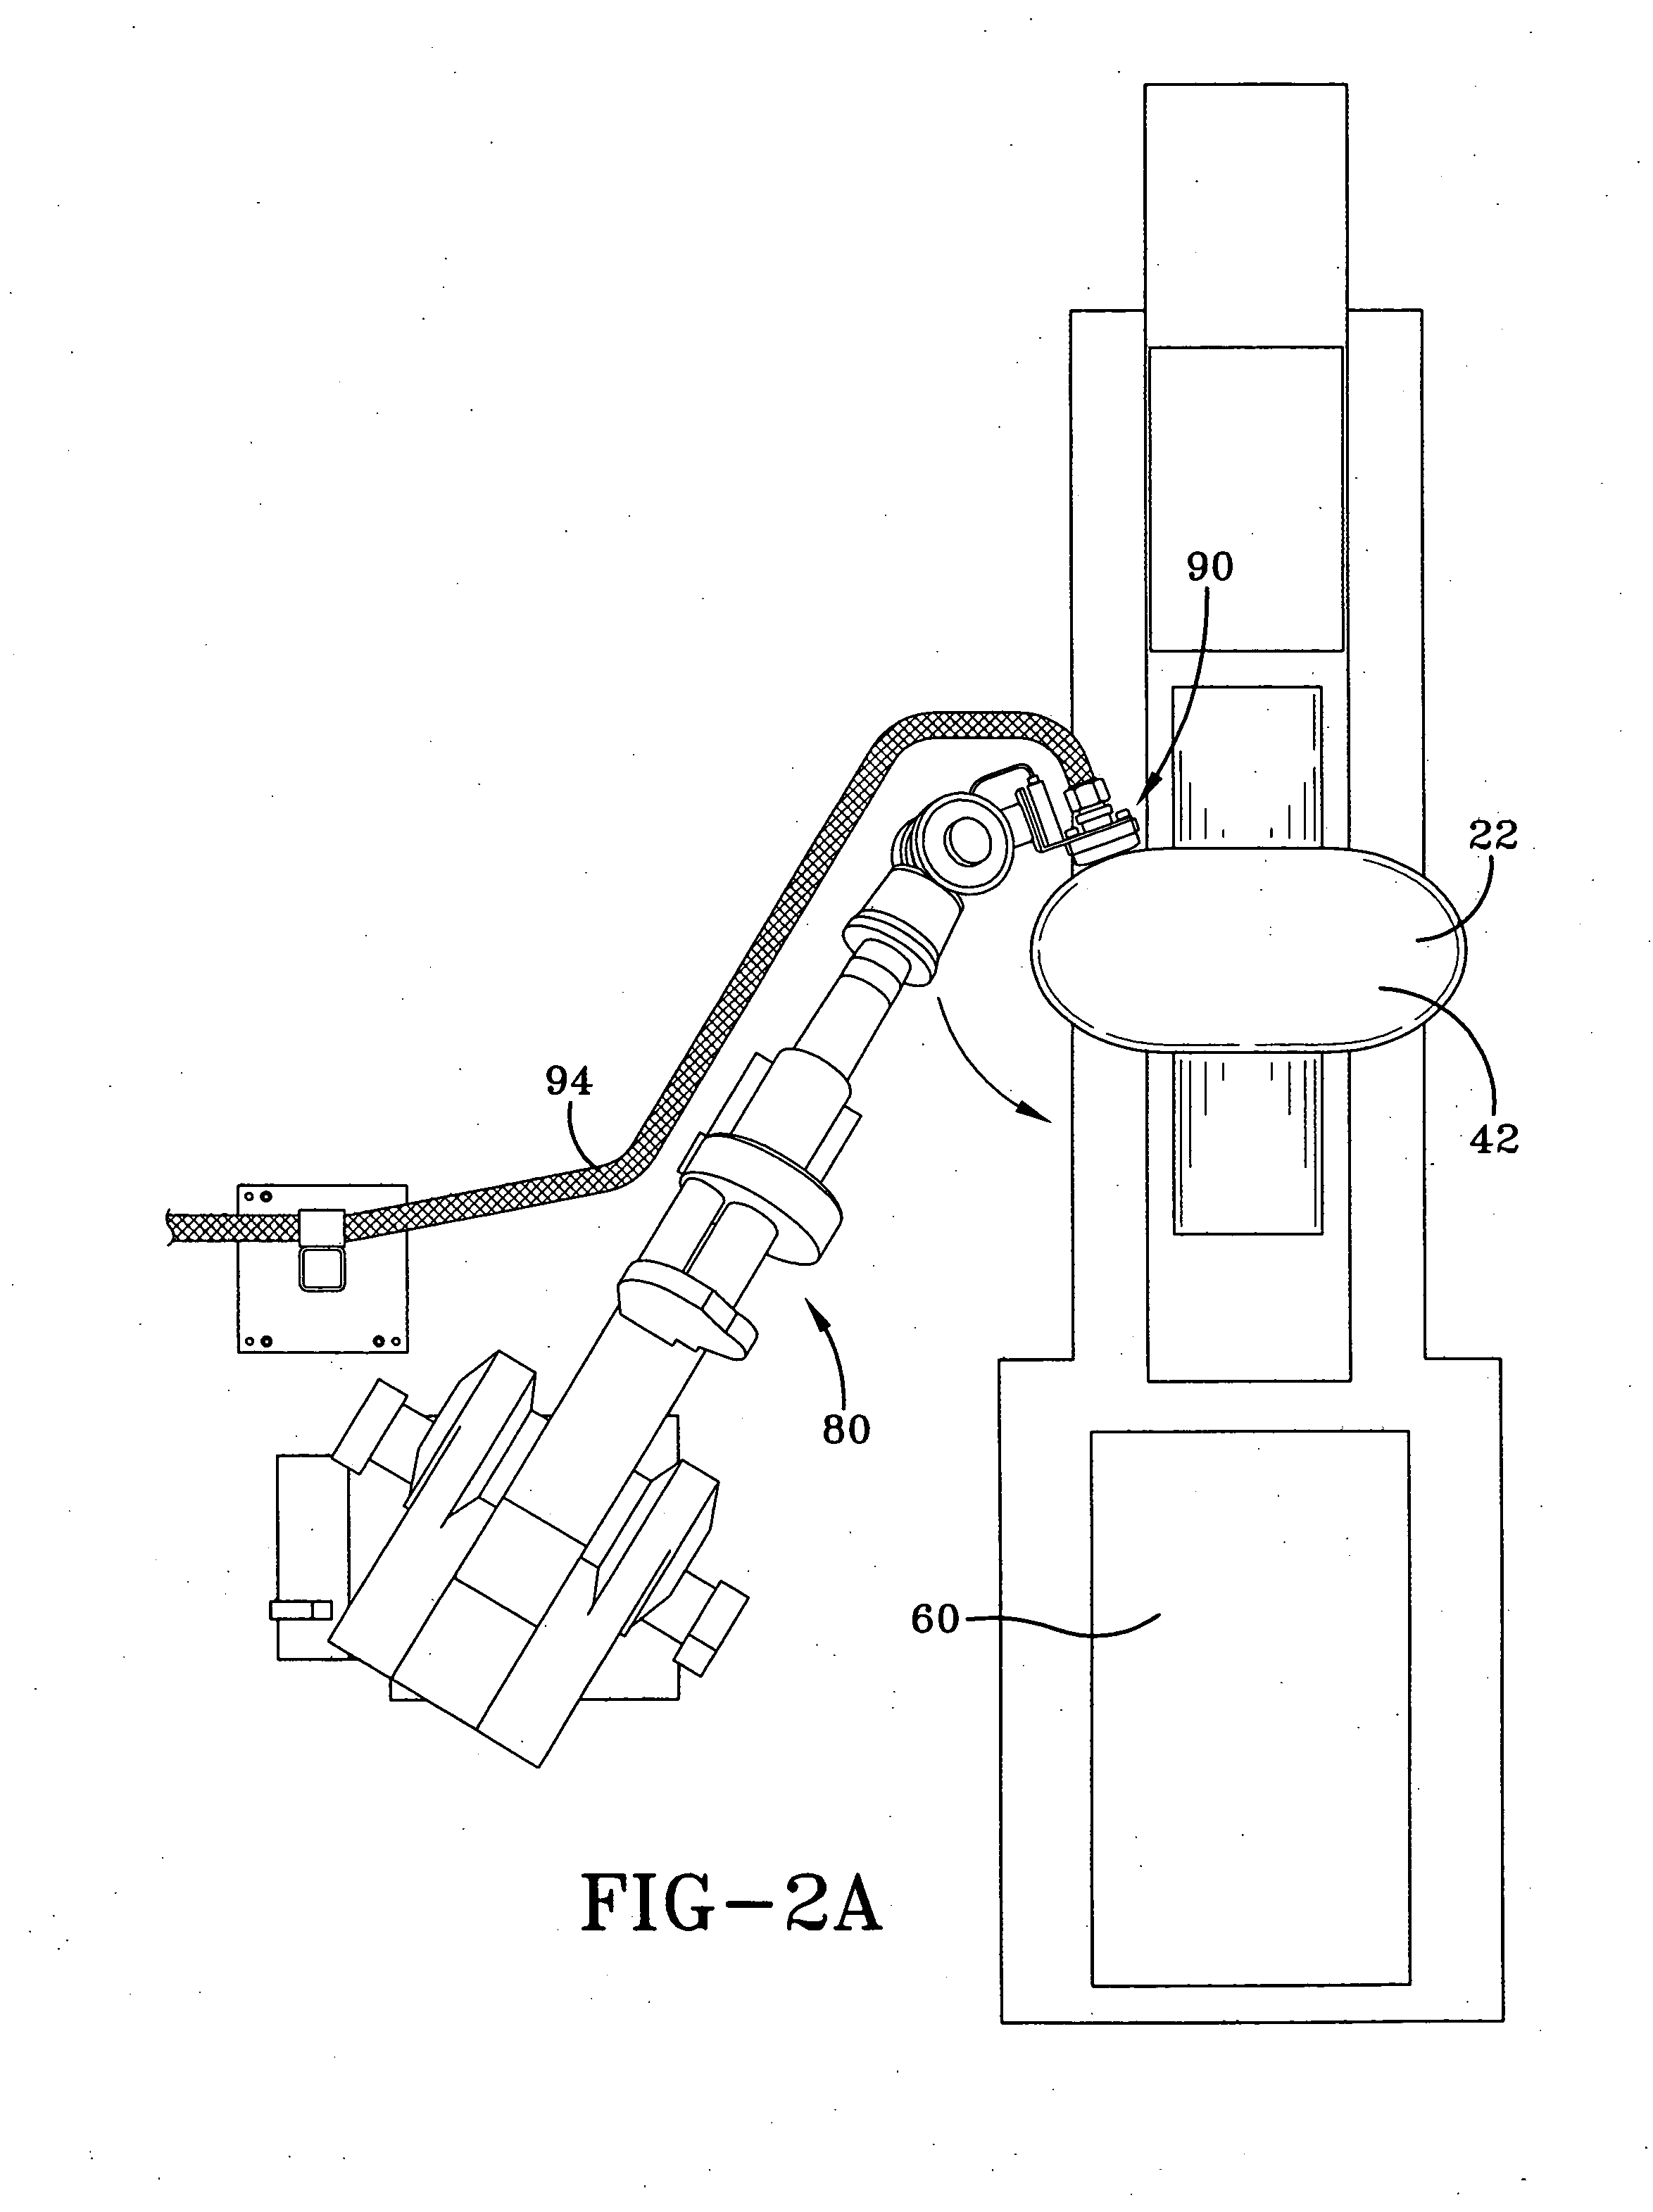 Method for manufacturing tires on a flexible manufacturing system